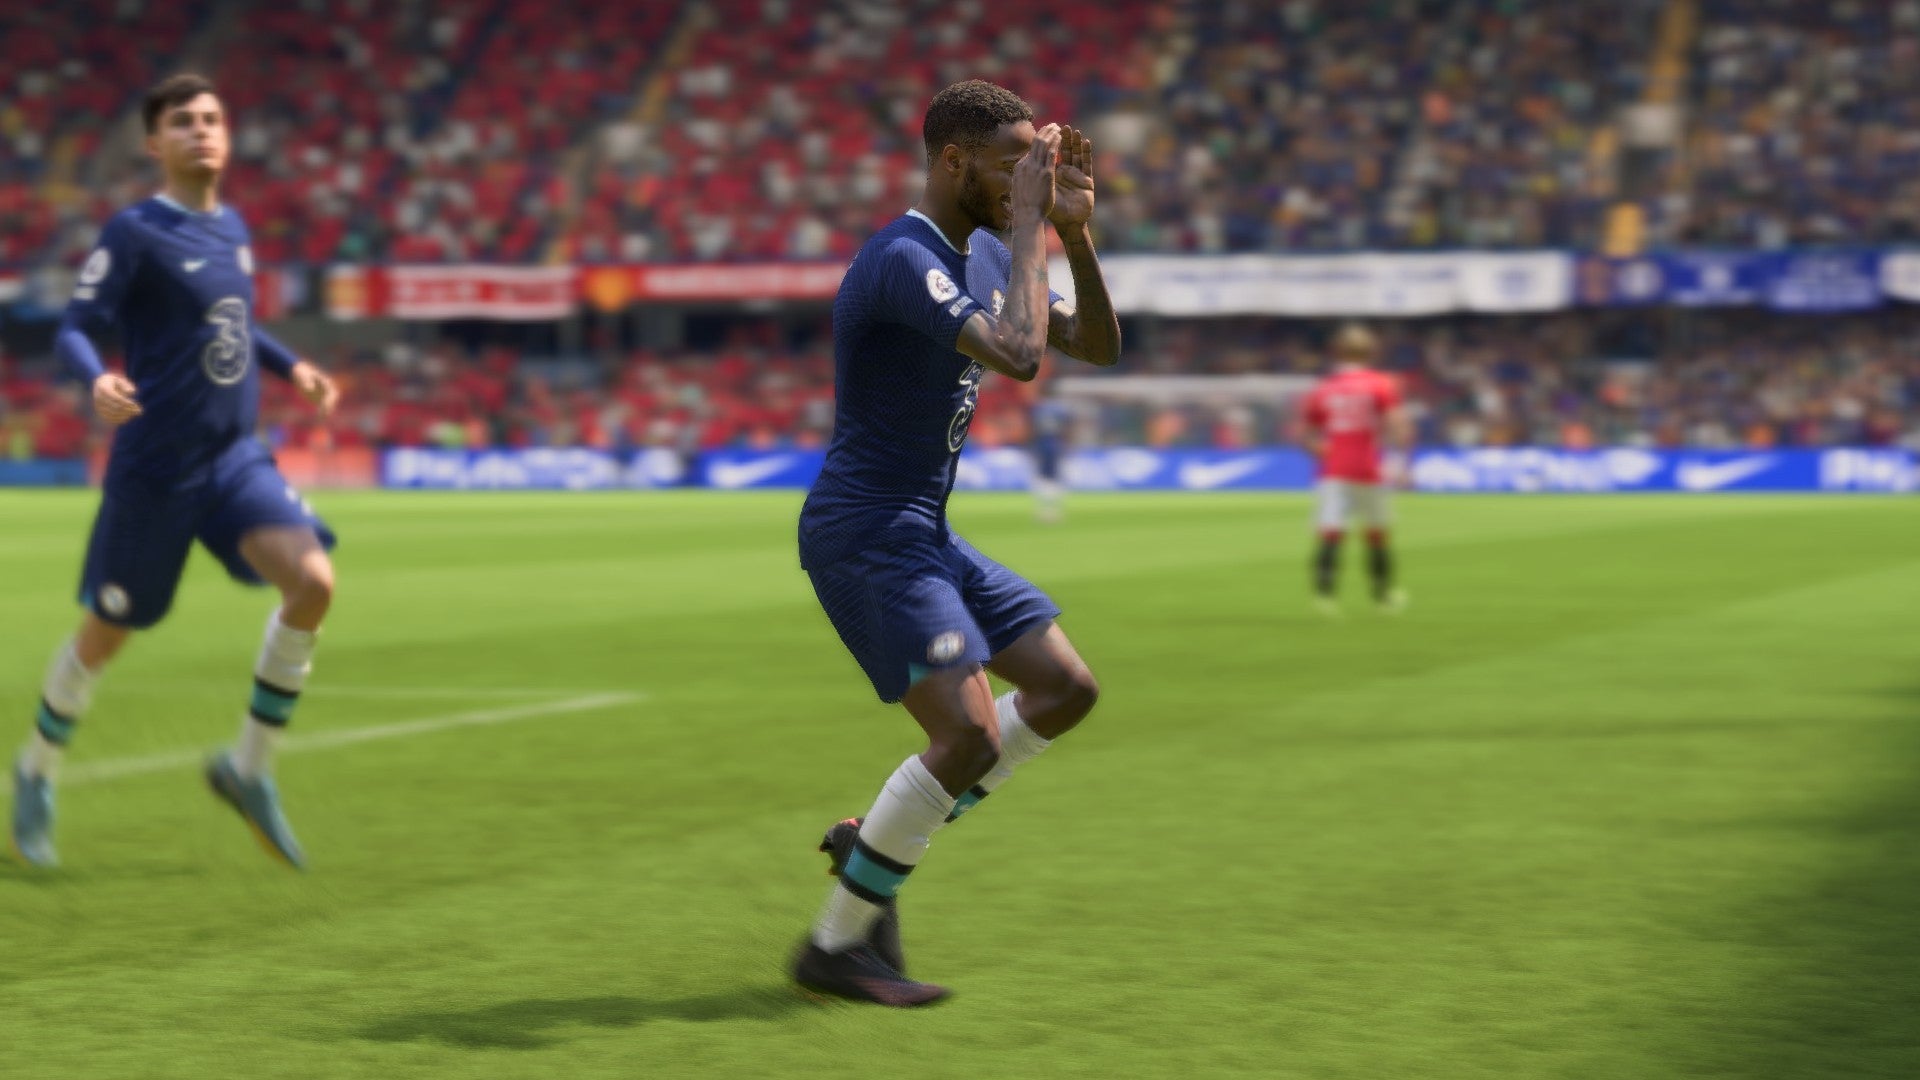 Sterling doing the Griddy in FIFA 23.